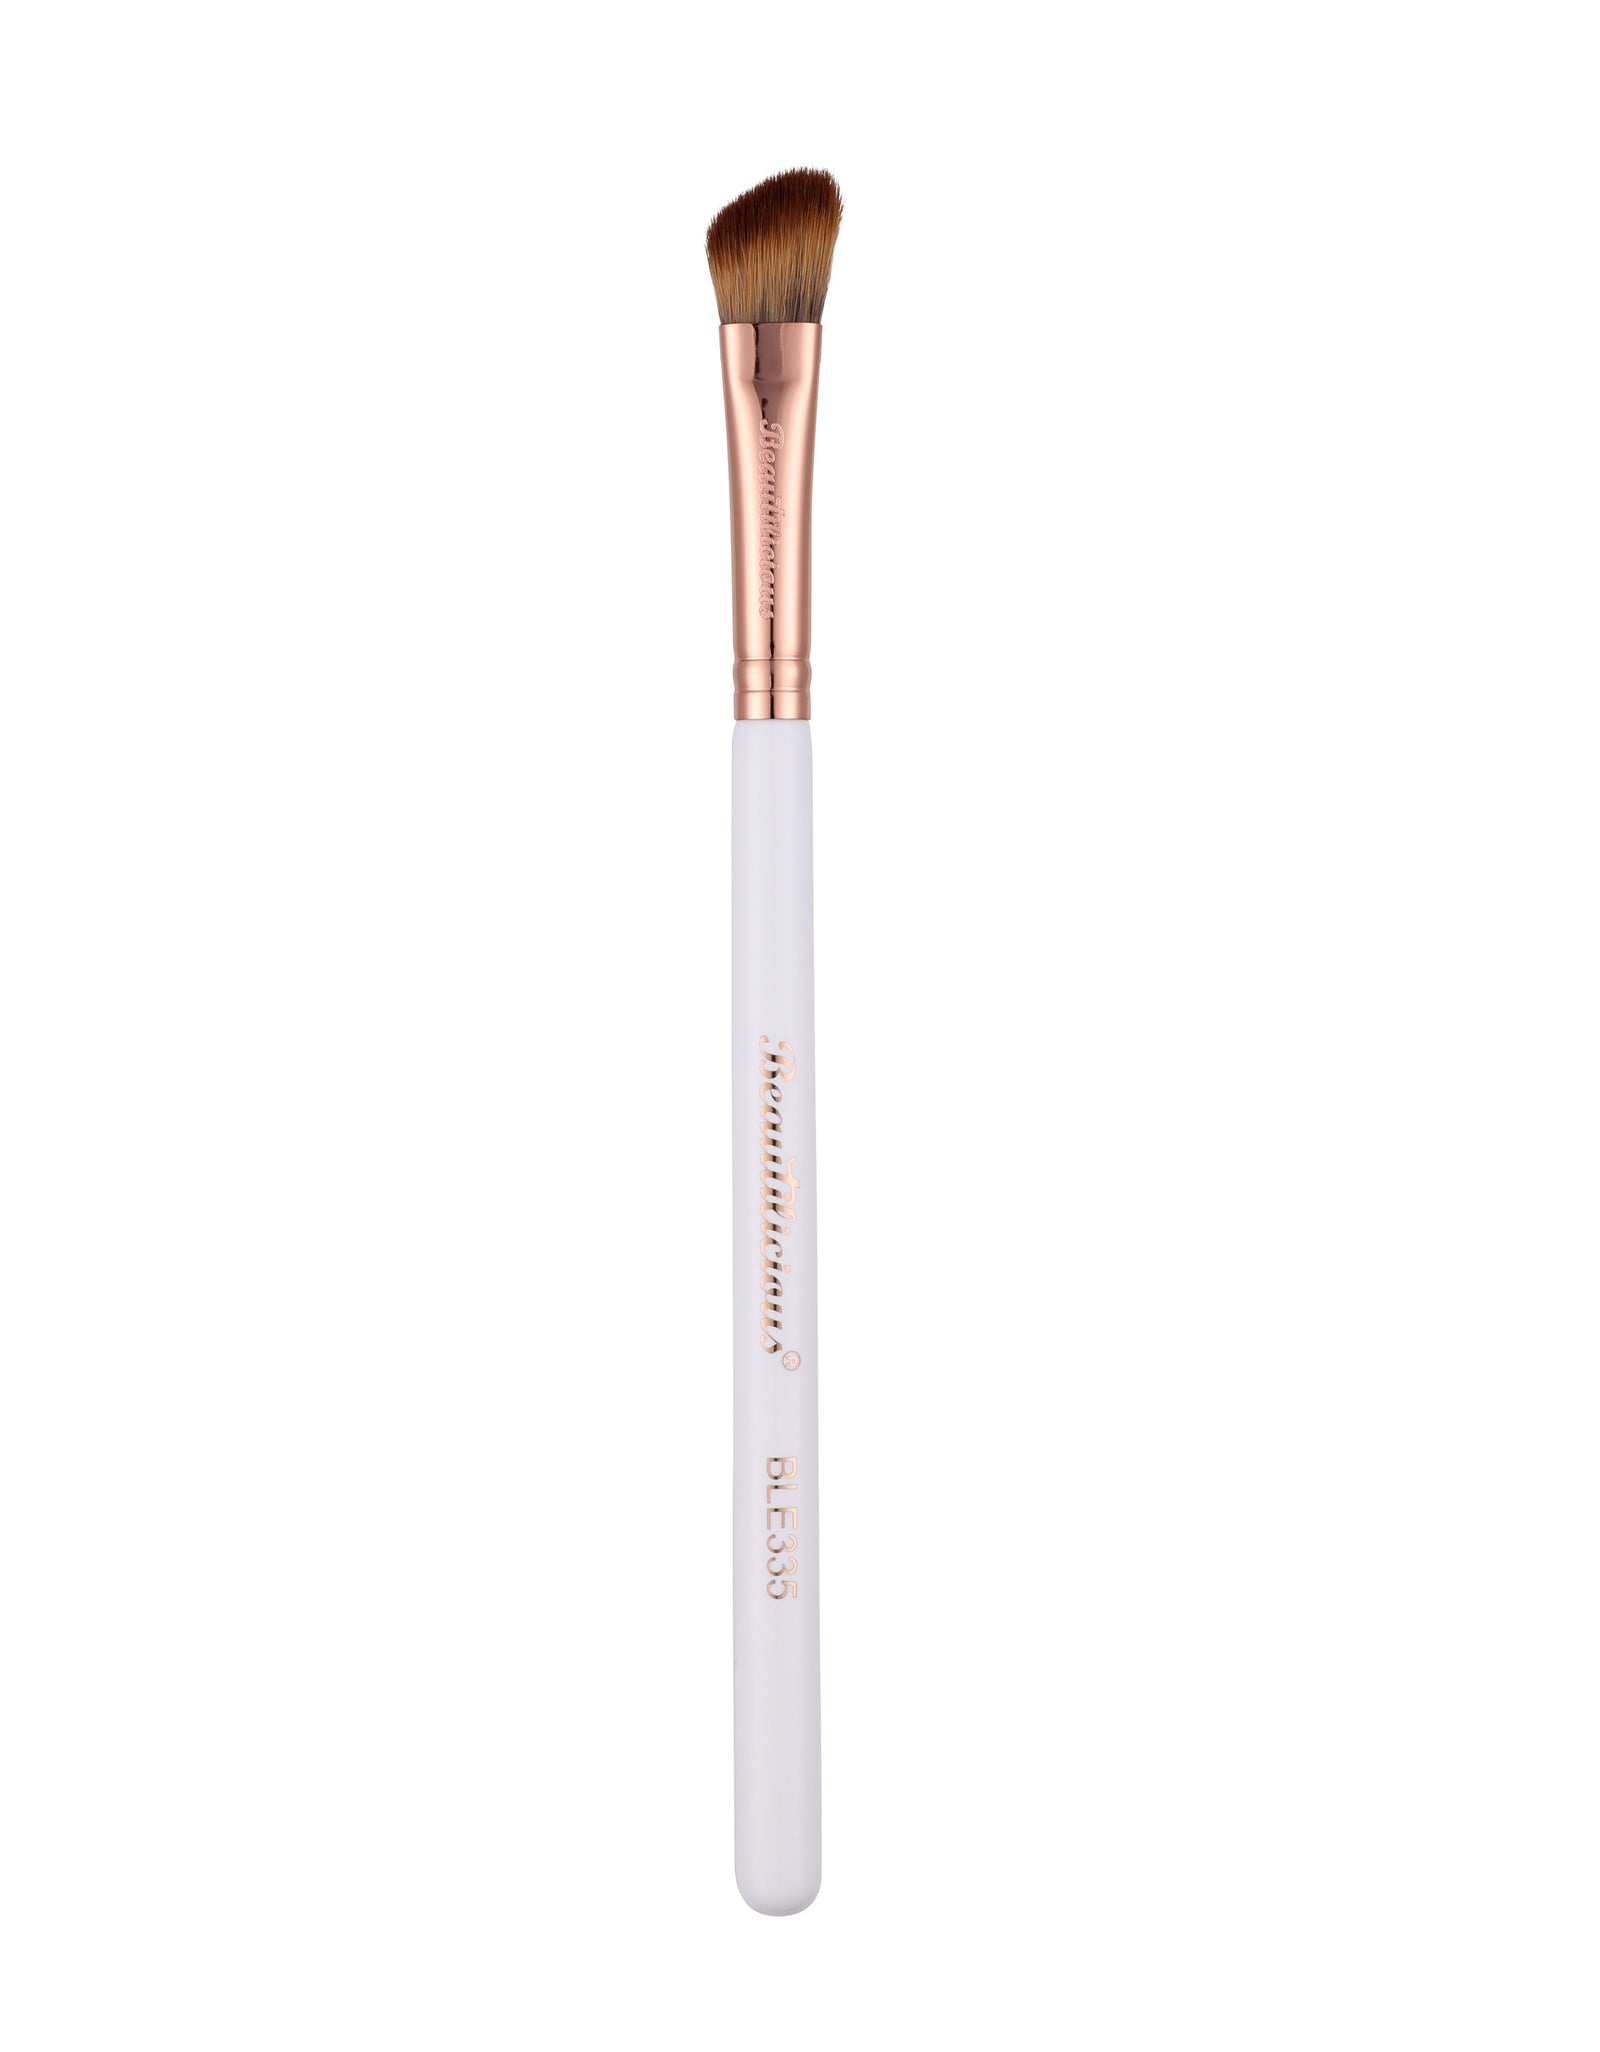 Angled Nose Contouring Brush For Makeup - BLE 335 – Beautilicious